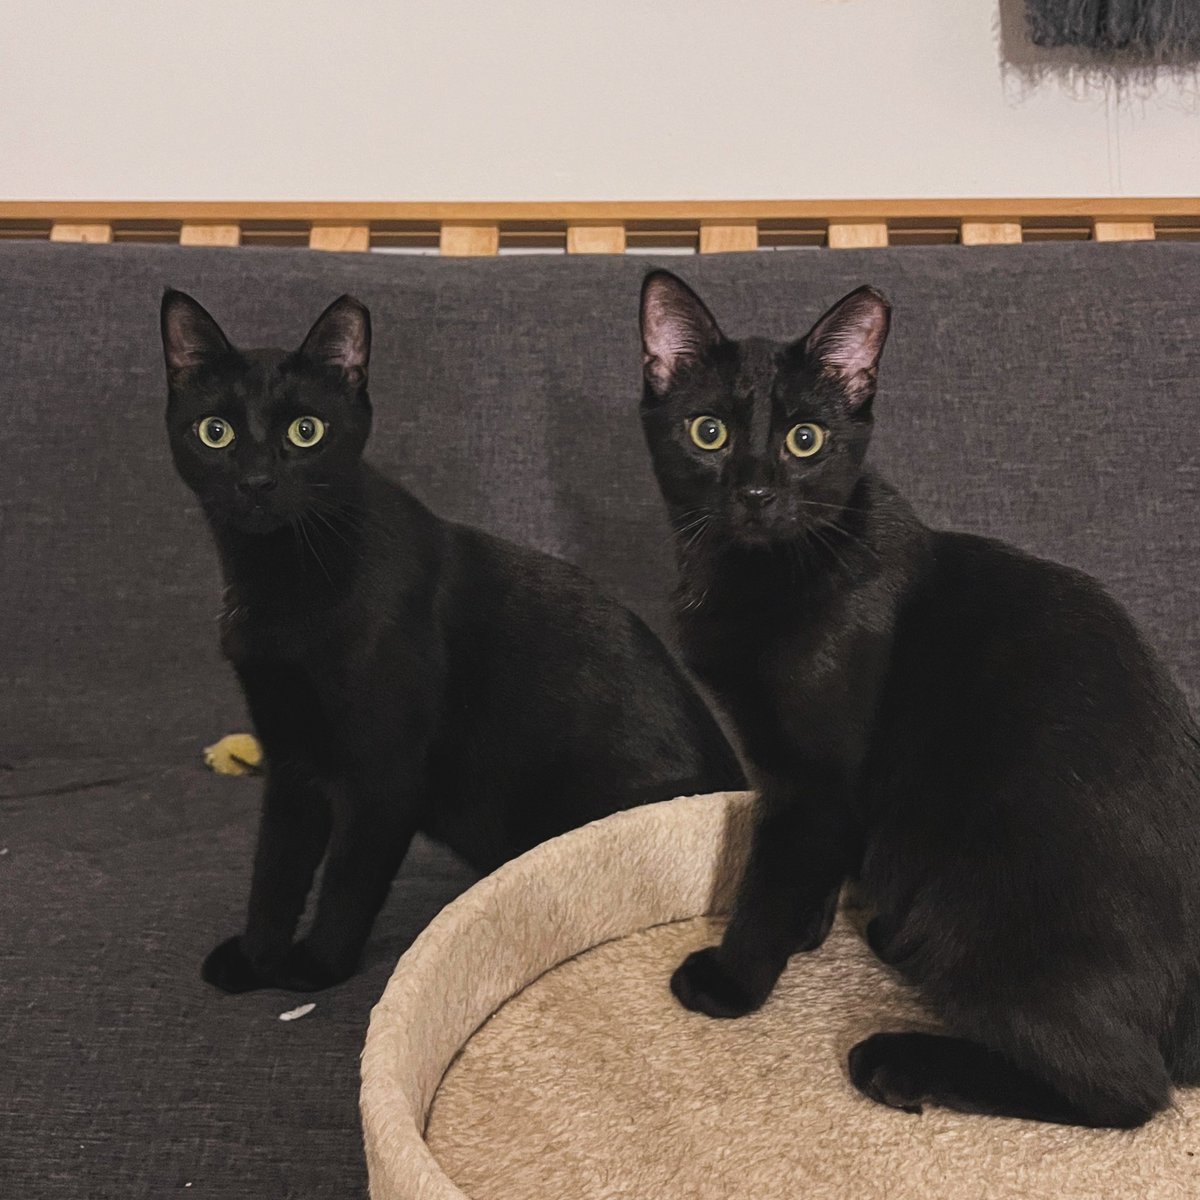 Summer (rear) and her baby Winter are ready to be adopted together! Autumn. Winters sibling, was adopted today, and now it’s their turn! #AdoptDontShop #KittensOfTwitter #rescuekittens